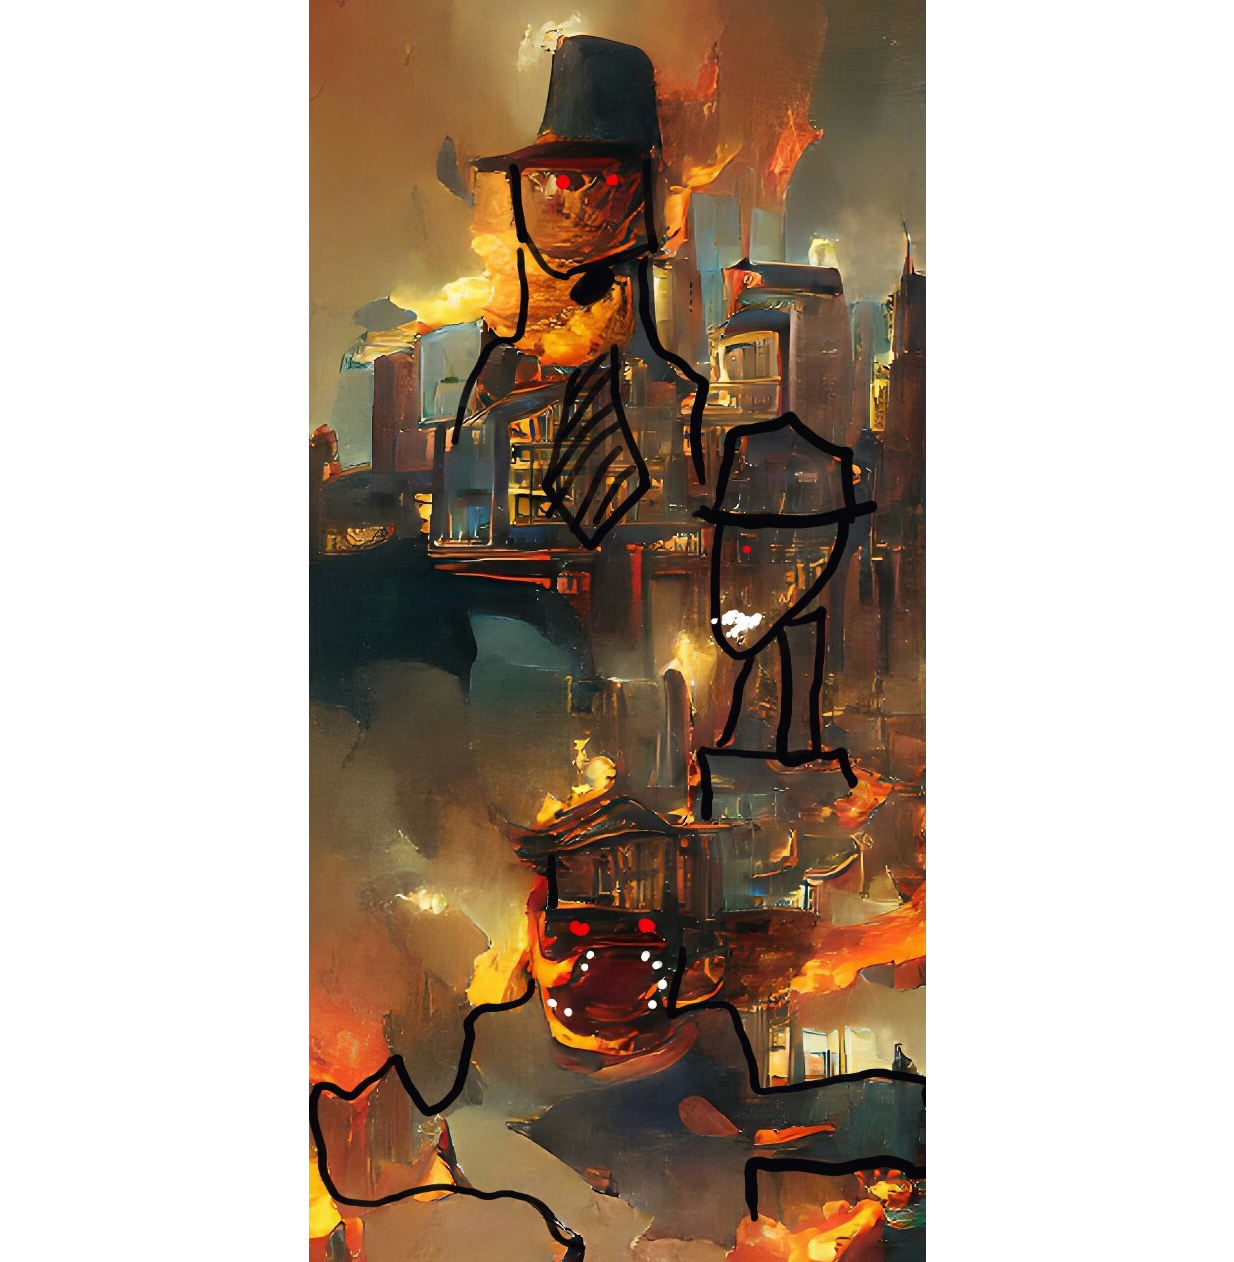 A typical “early Wombo” dream-image full of fire and buildings has been crudely traced over to suggest human-ish forms with red eyes, black hats, and white teeth.